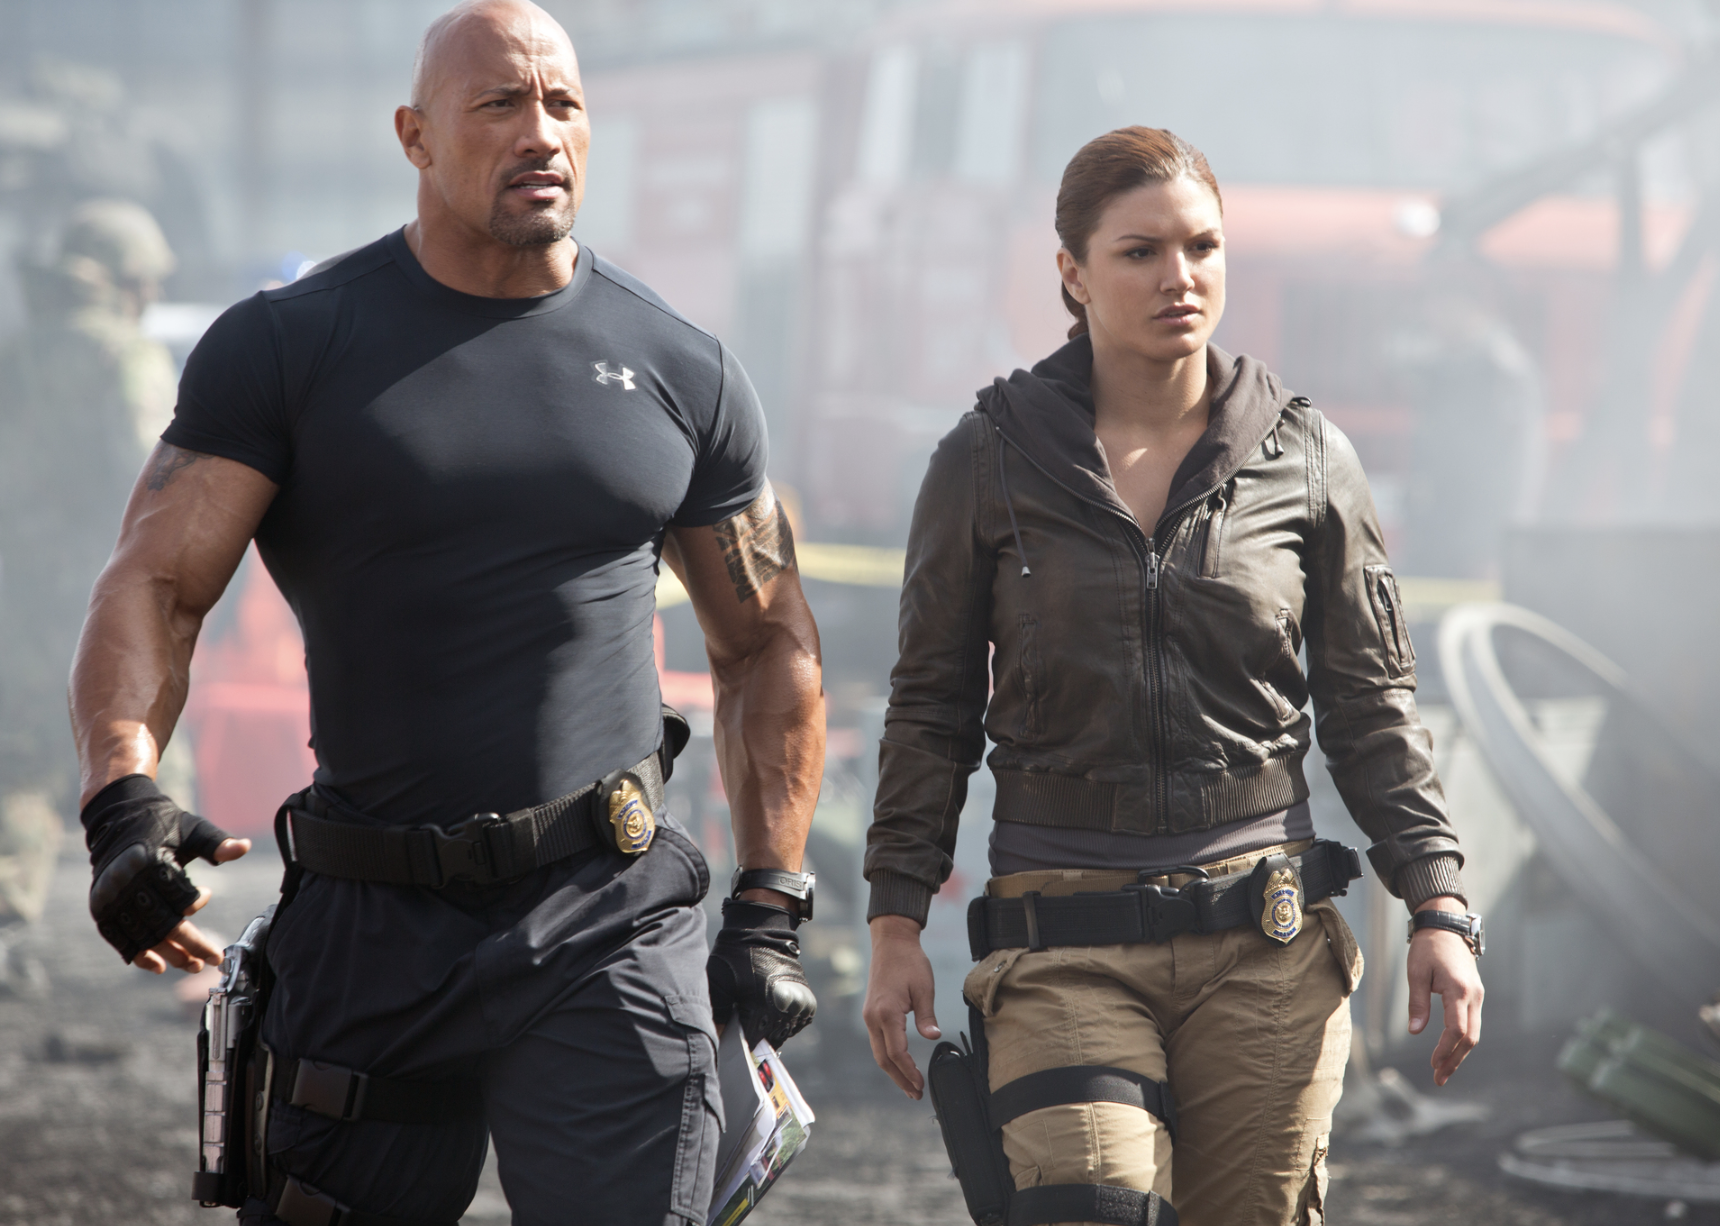 Dwayne Johnson and Gina Carano in "Fast & Furious 6"